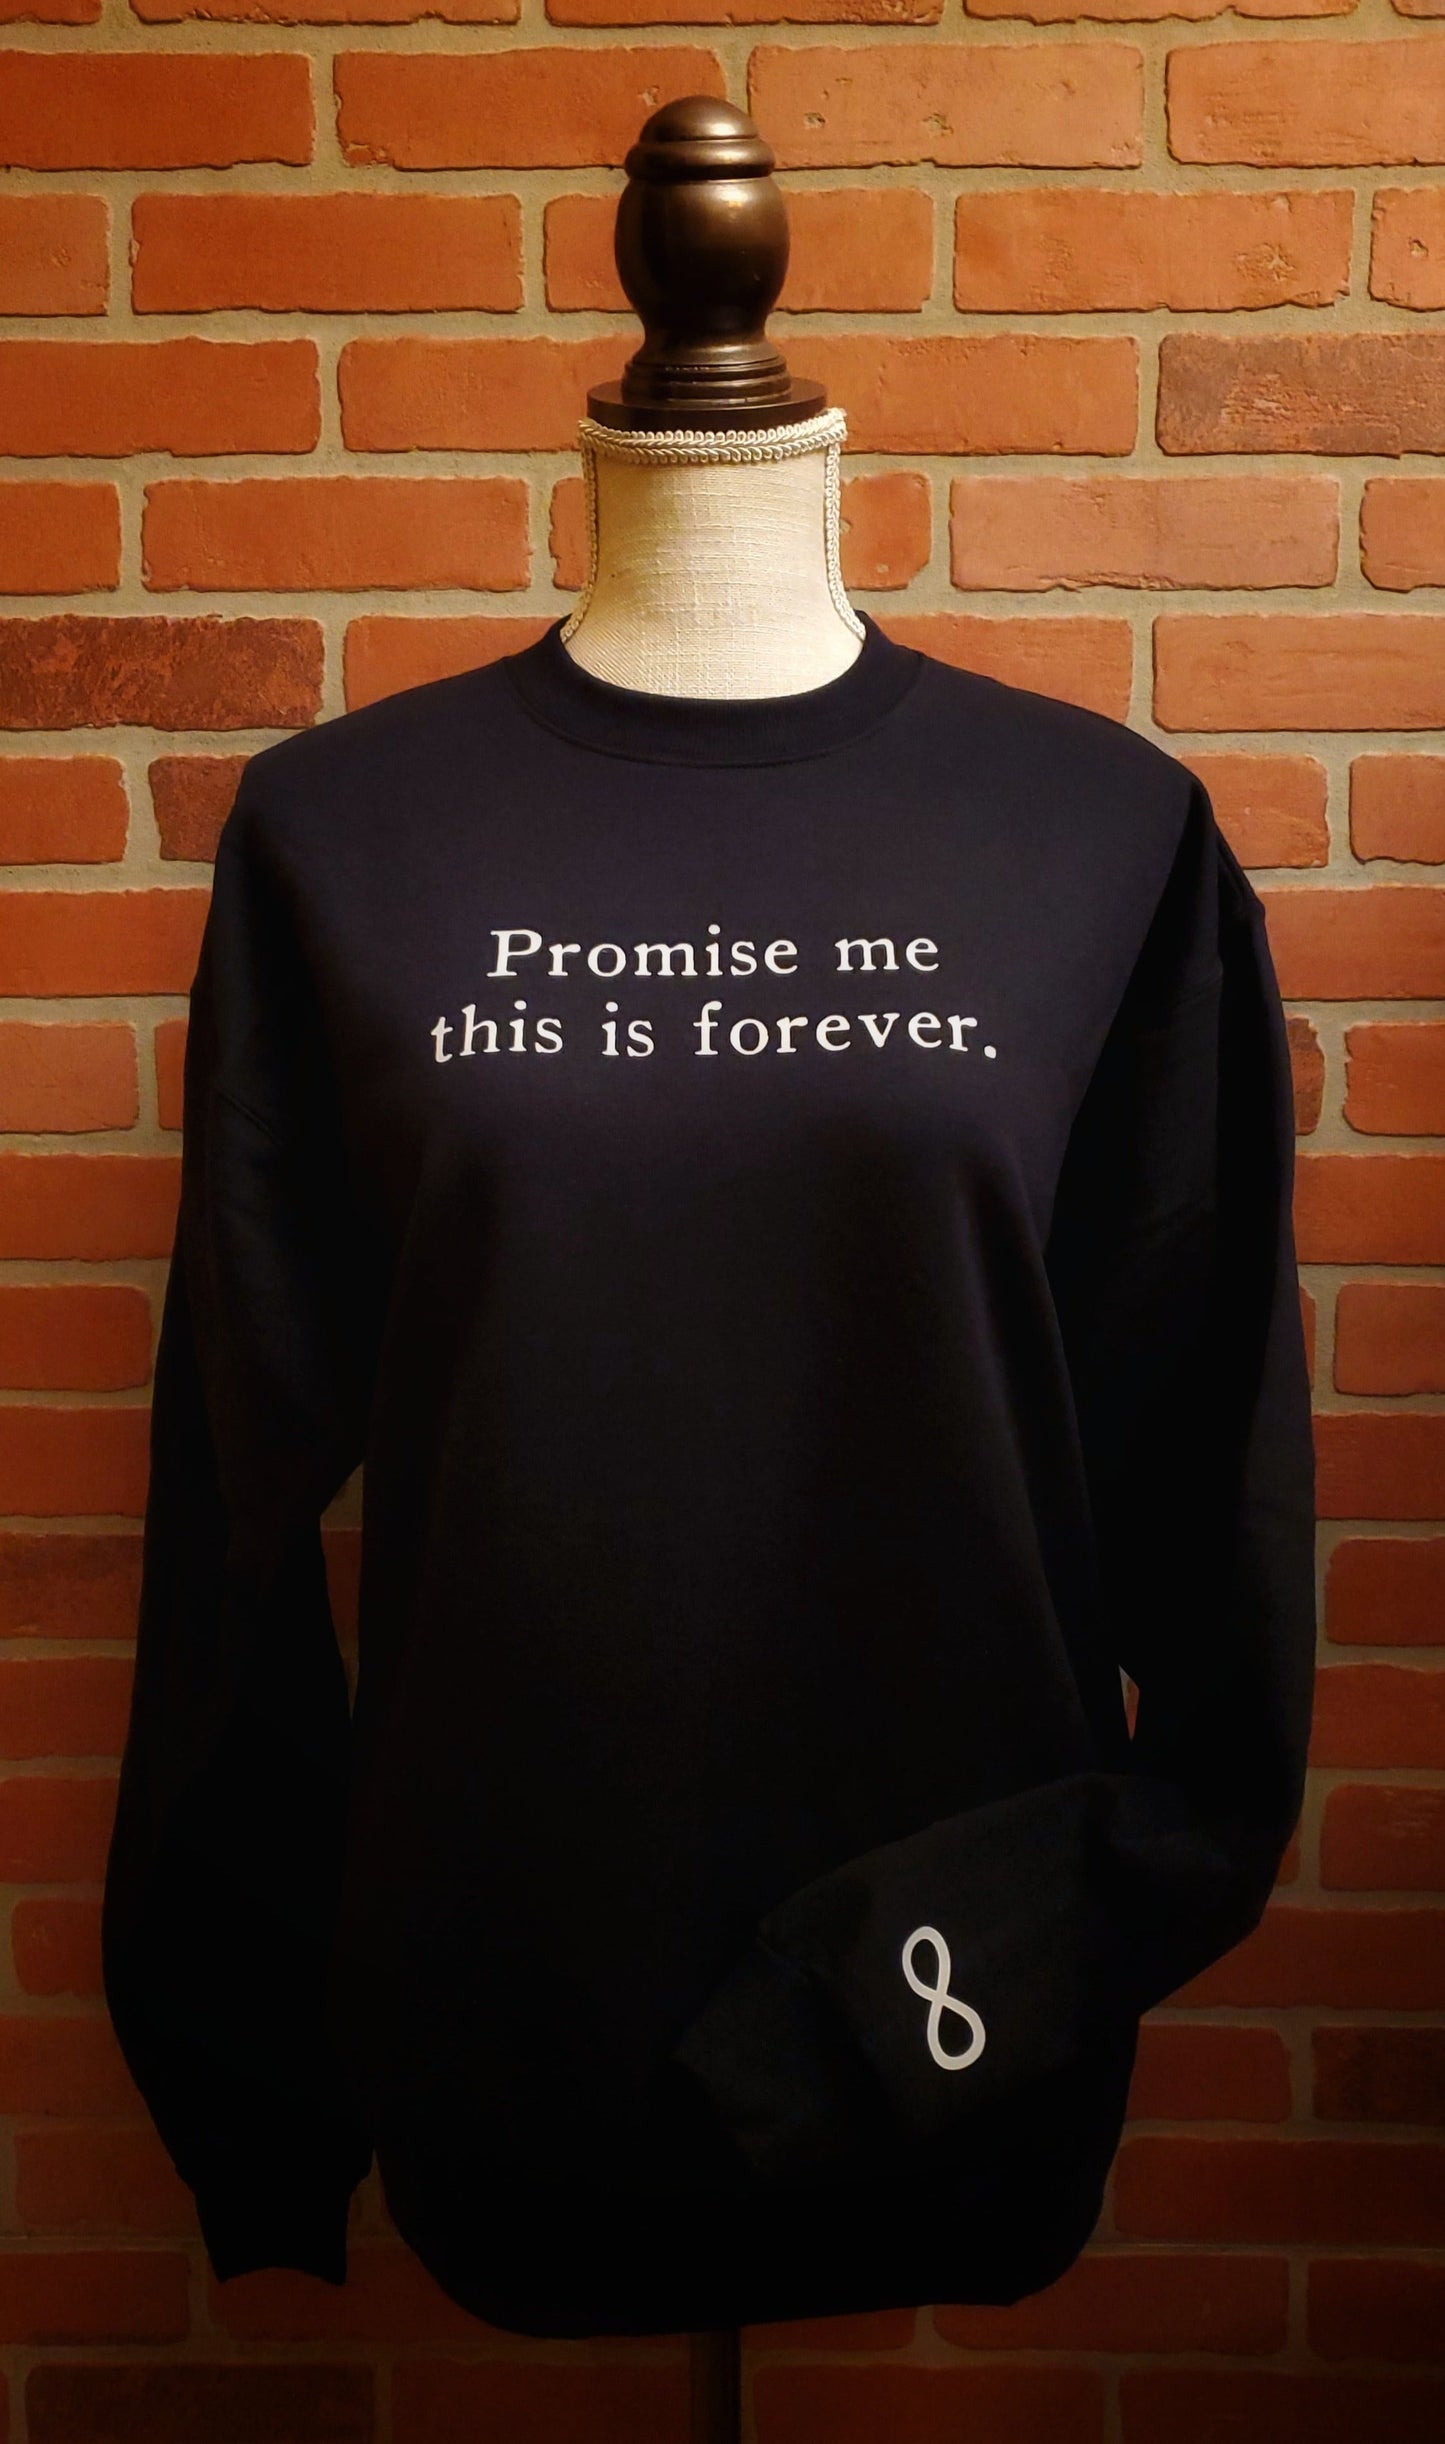 Promise me this is forever. Crewneck - The Vampire Diaries InspiredPromise me this is forever. Crewneck - The Vampire Diaries Inspired